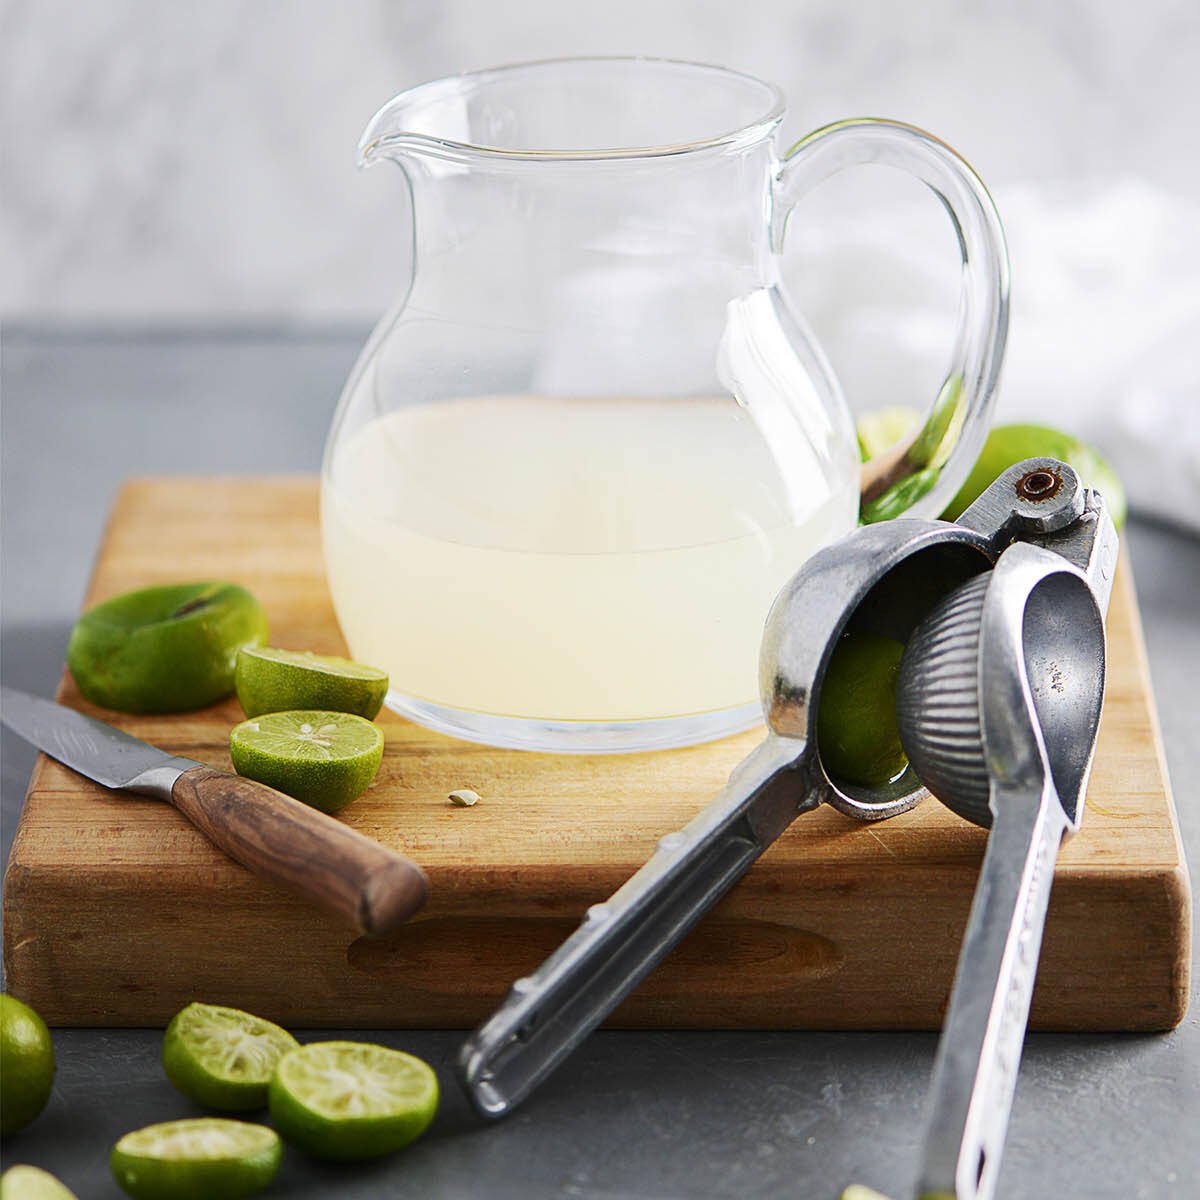 A glass jar half filled with lime juice and squeezed limes on the side.